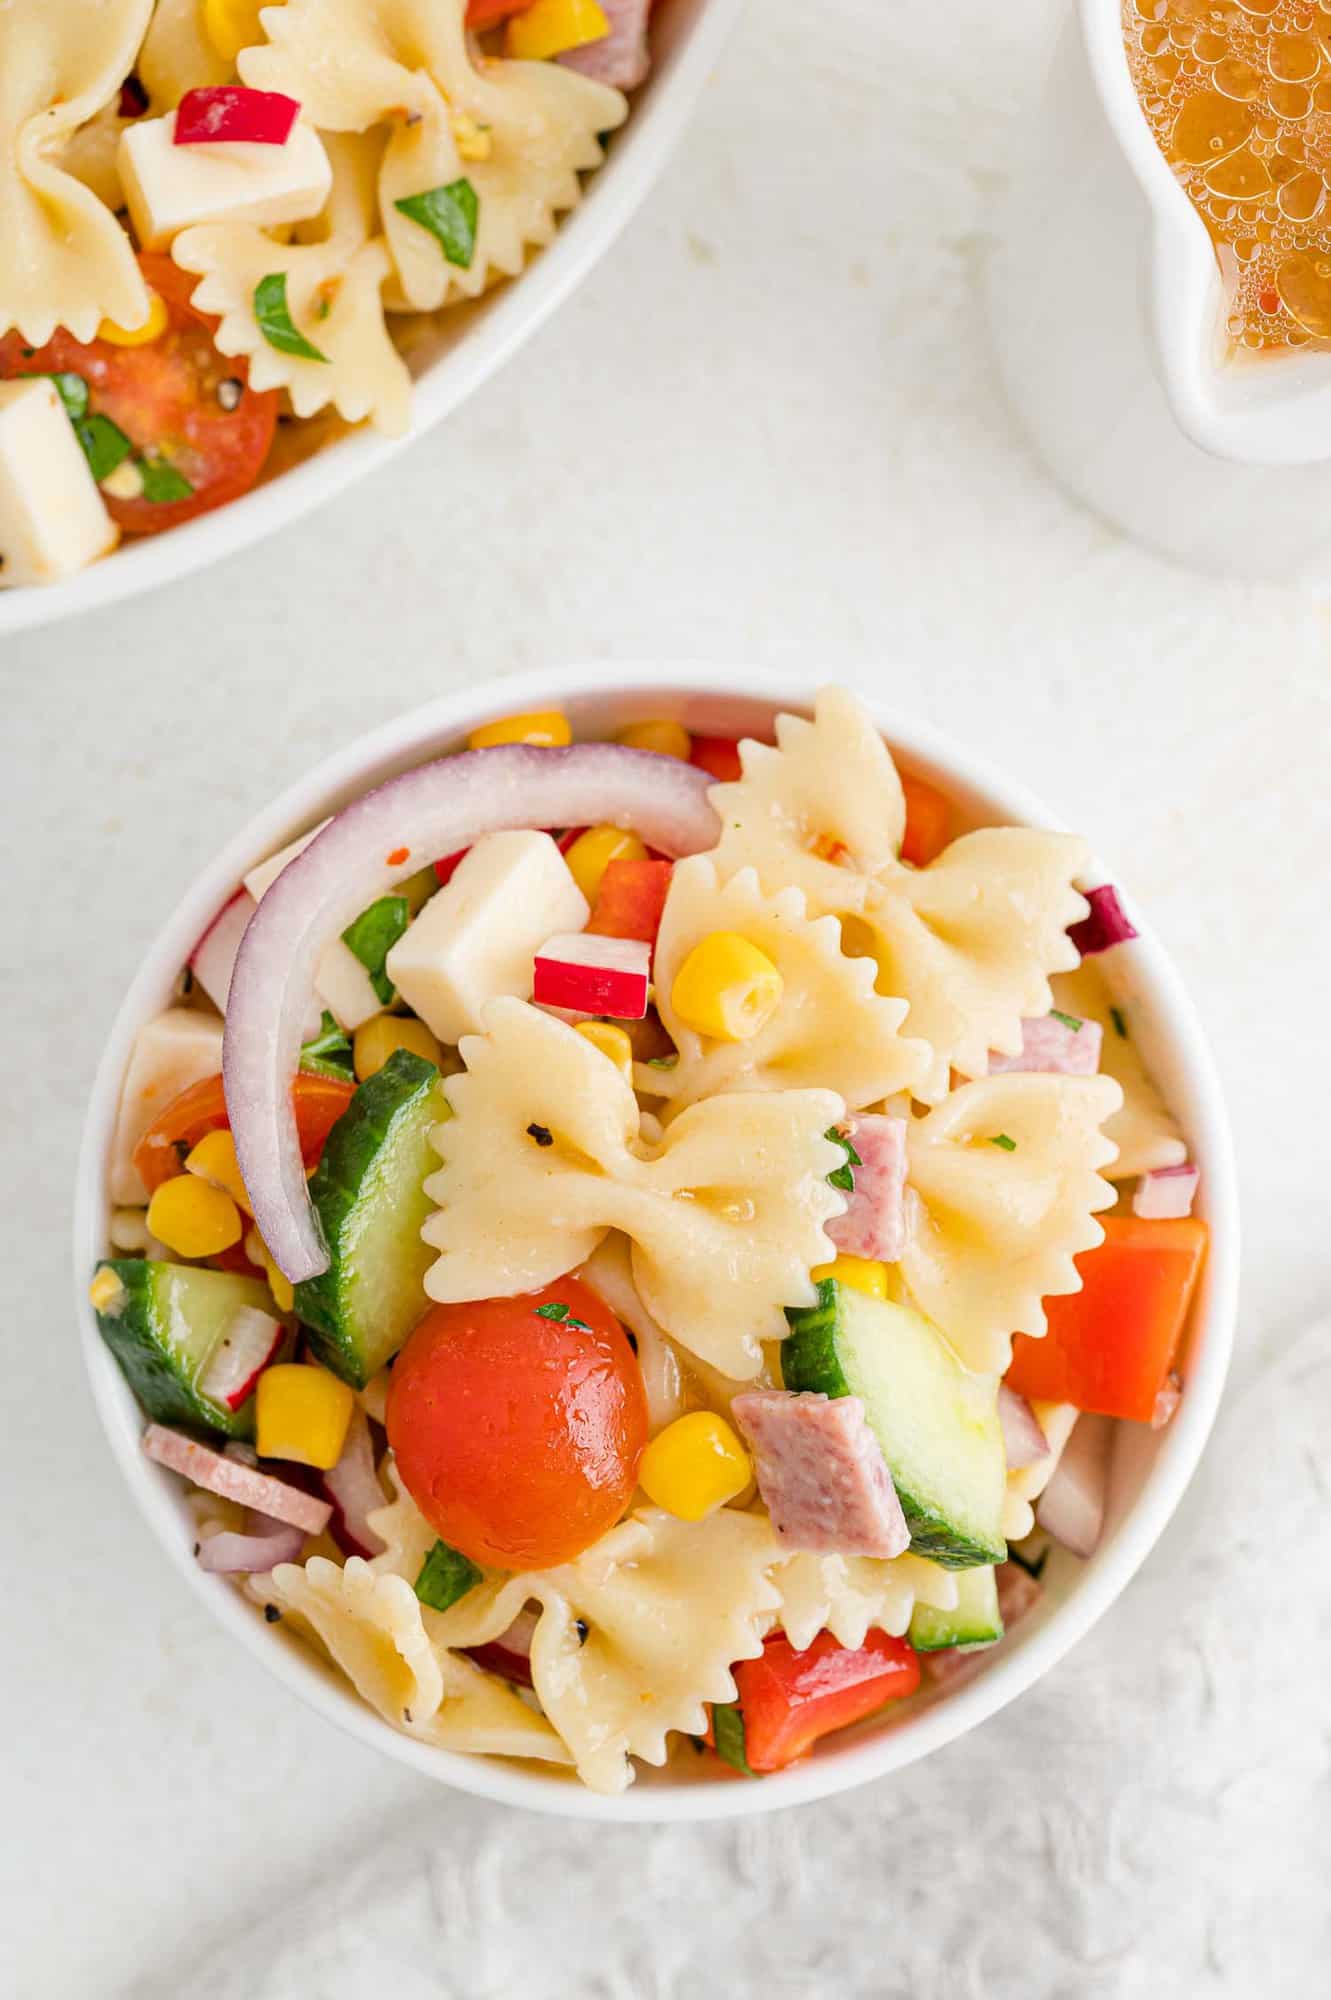 Pasta salad in a small round white bowl.